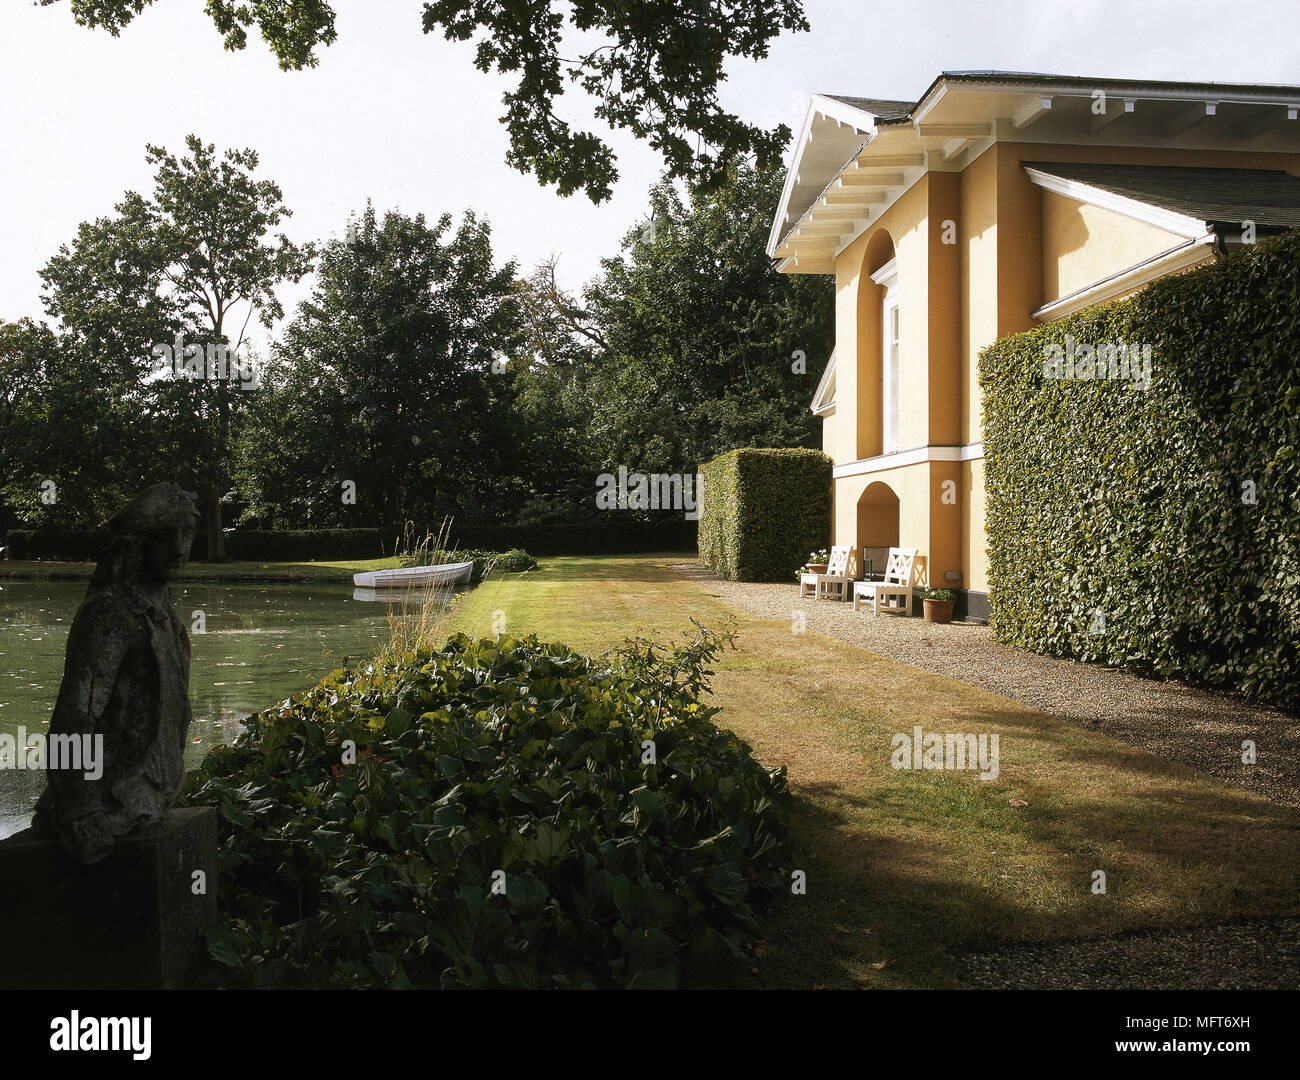 Exterior grand country lakeside house  exteriors houses lakes hedging Stock Photo